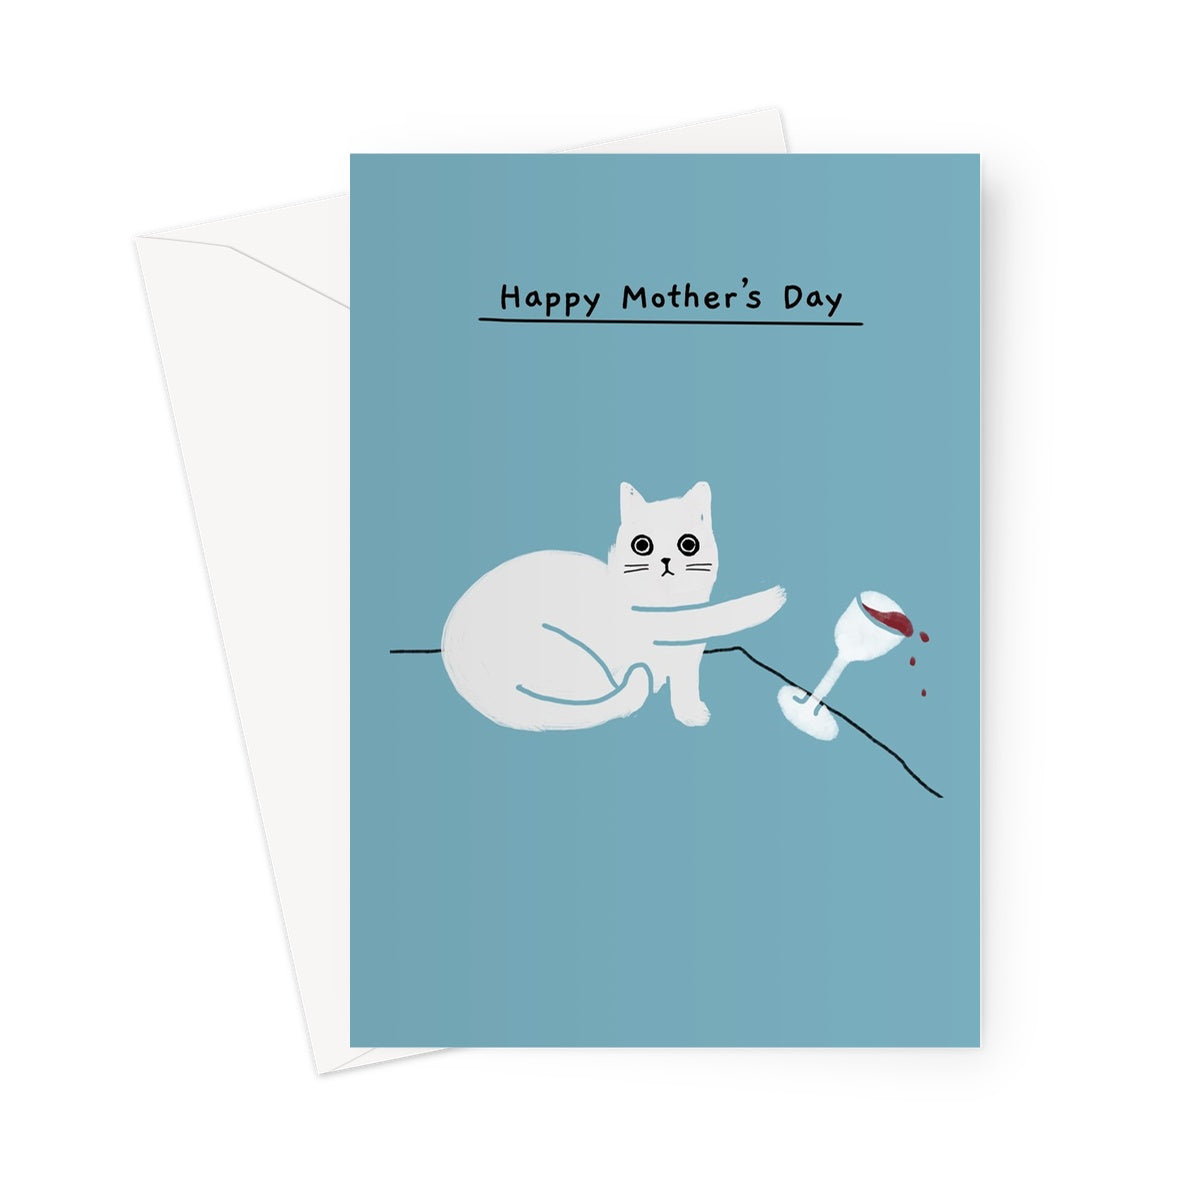 Wine Spill - Happy Mother's Day Card